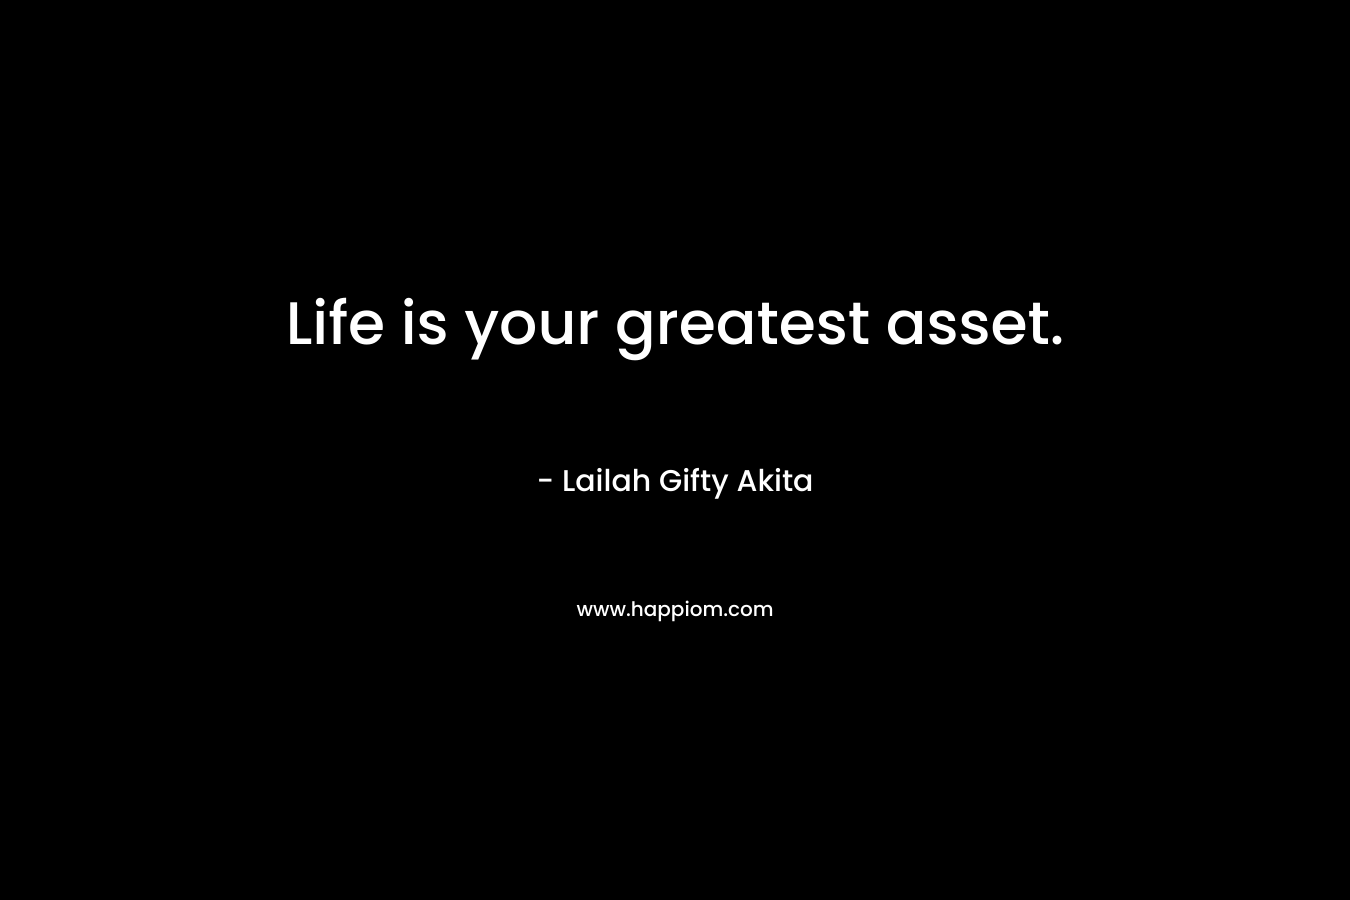 Life is your greatest asset. – Lailah Gifty Akita